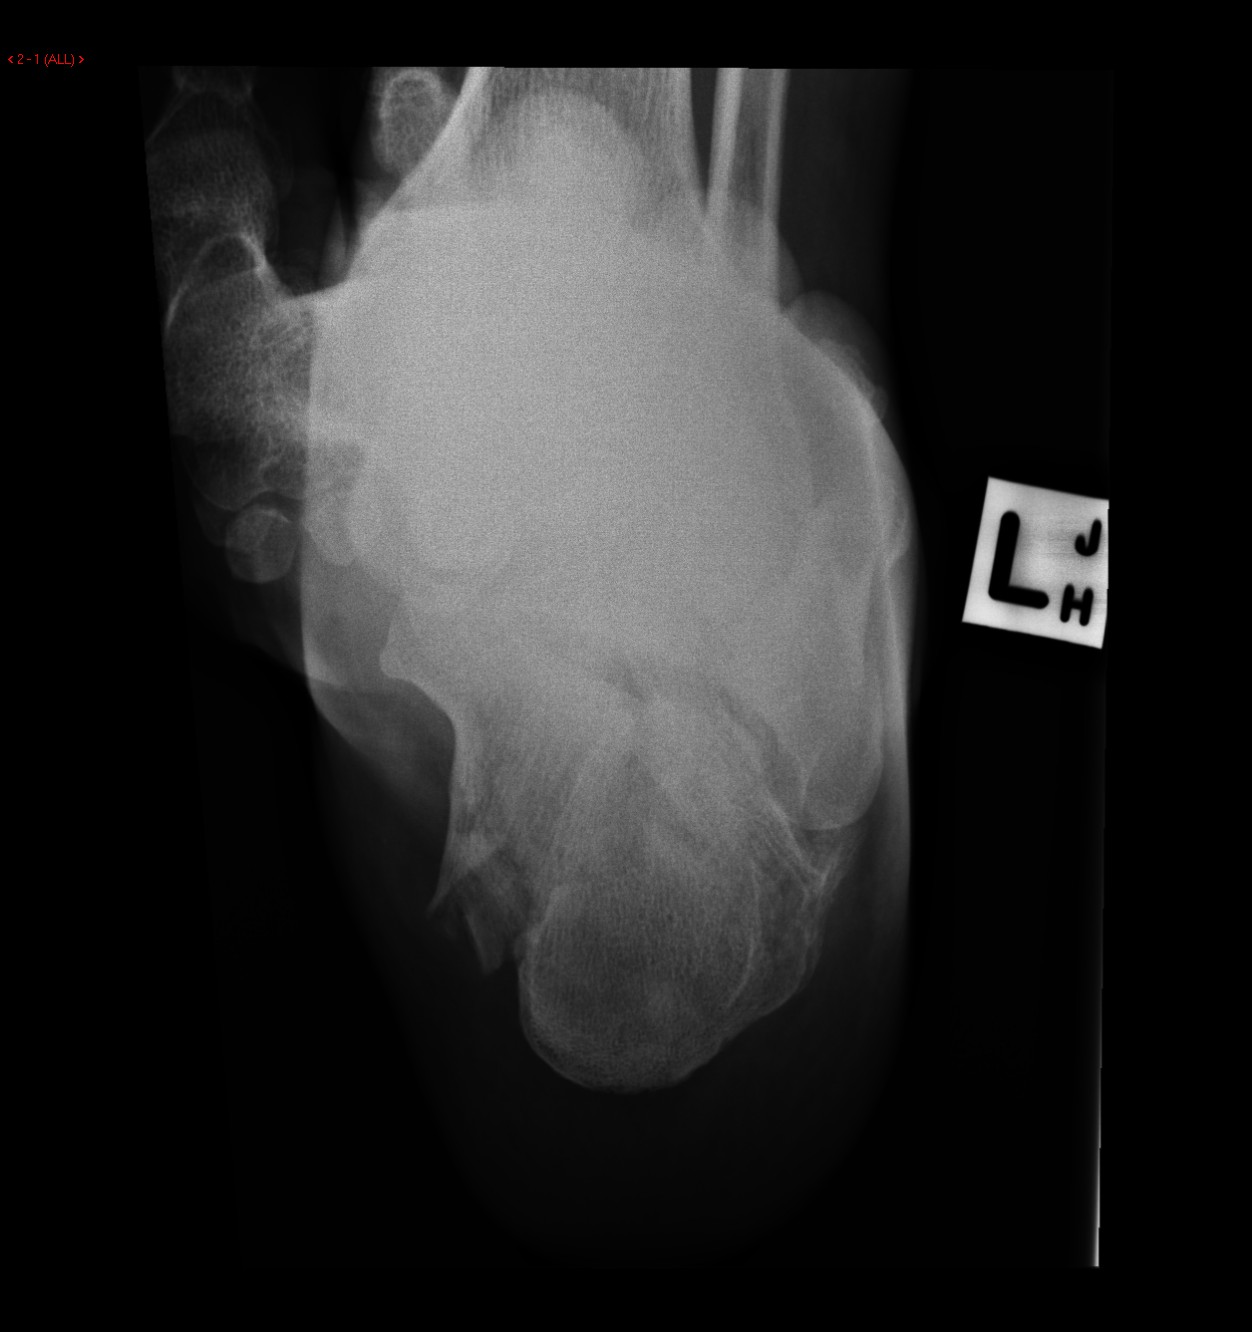 Plain films show a comminuted fracture of the left calcaneus with a flattening of Bohler's angle.